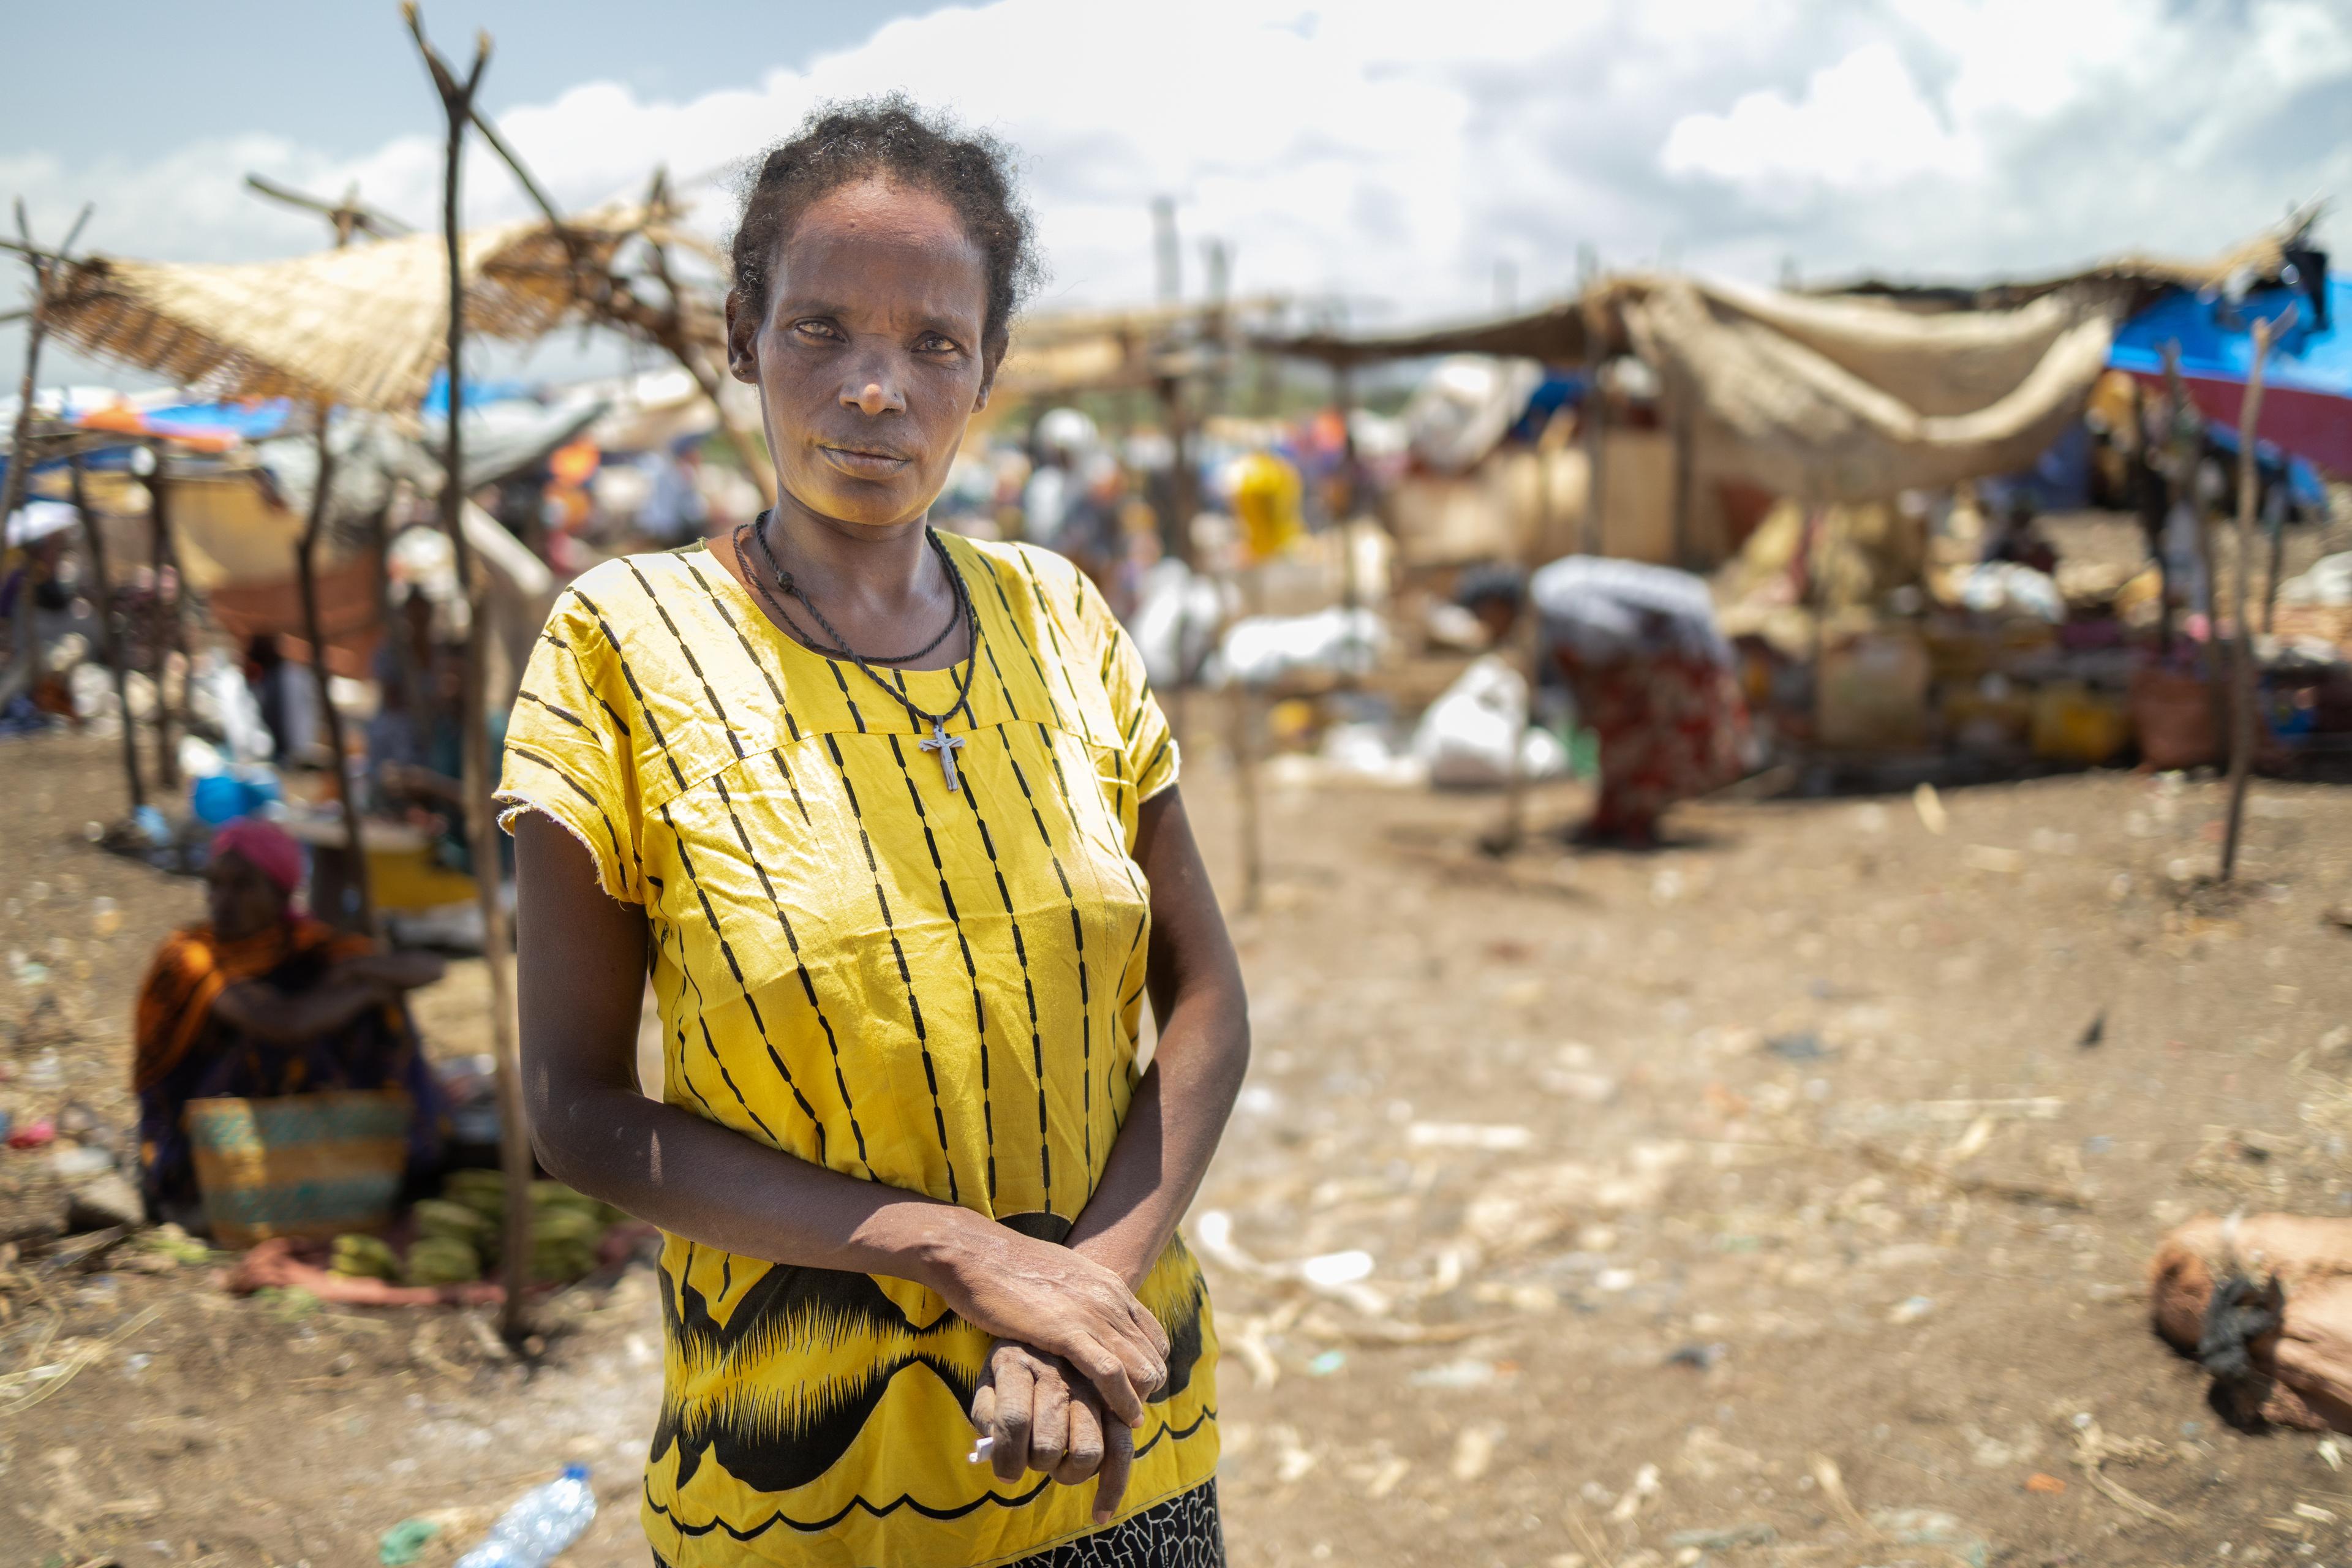 A woman in front of the market destroyed by arson during the conflict in Derashe, Ethiopia.